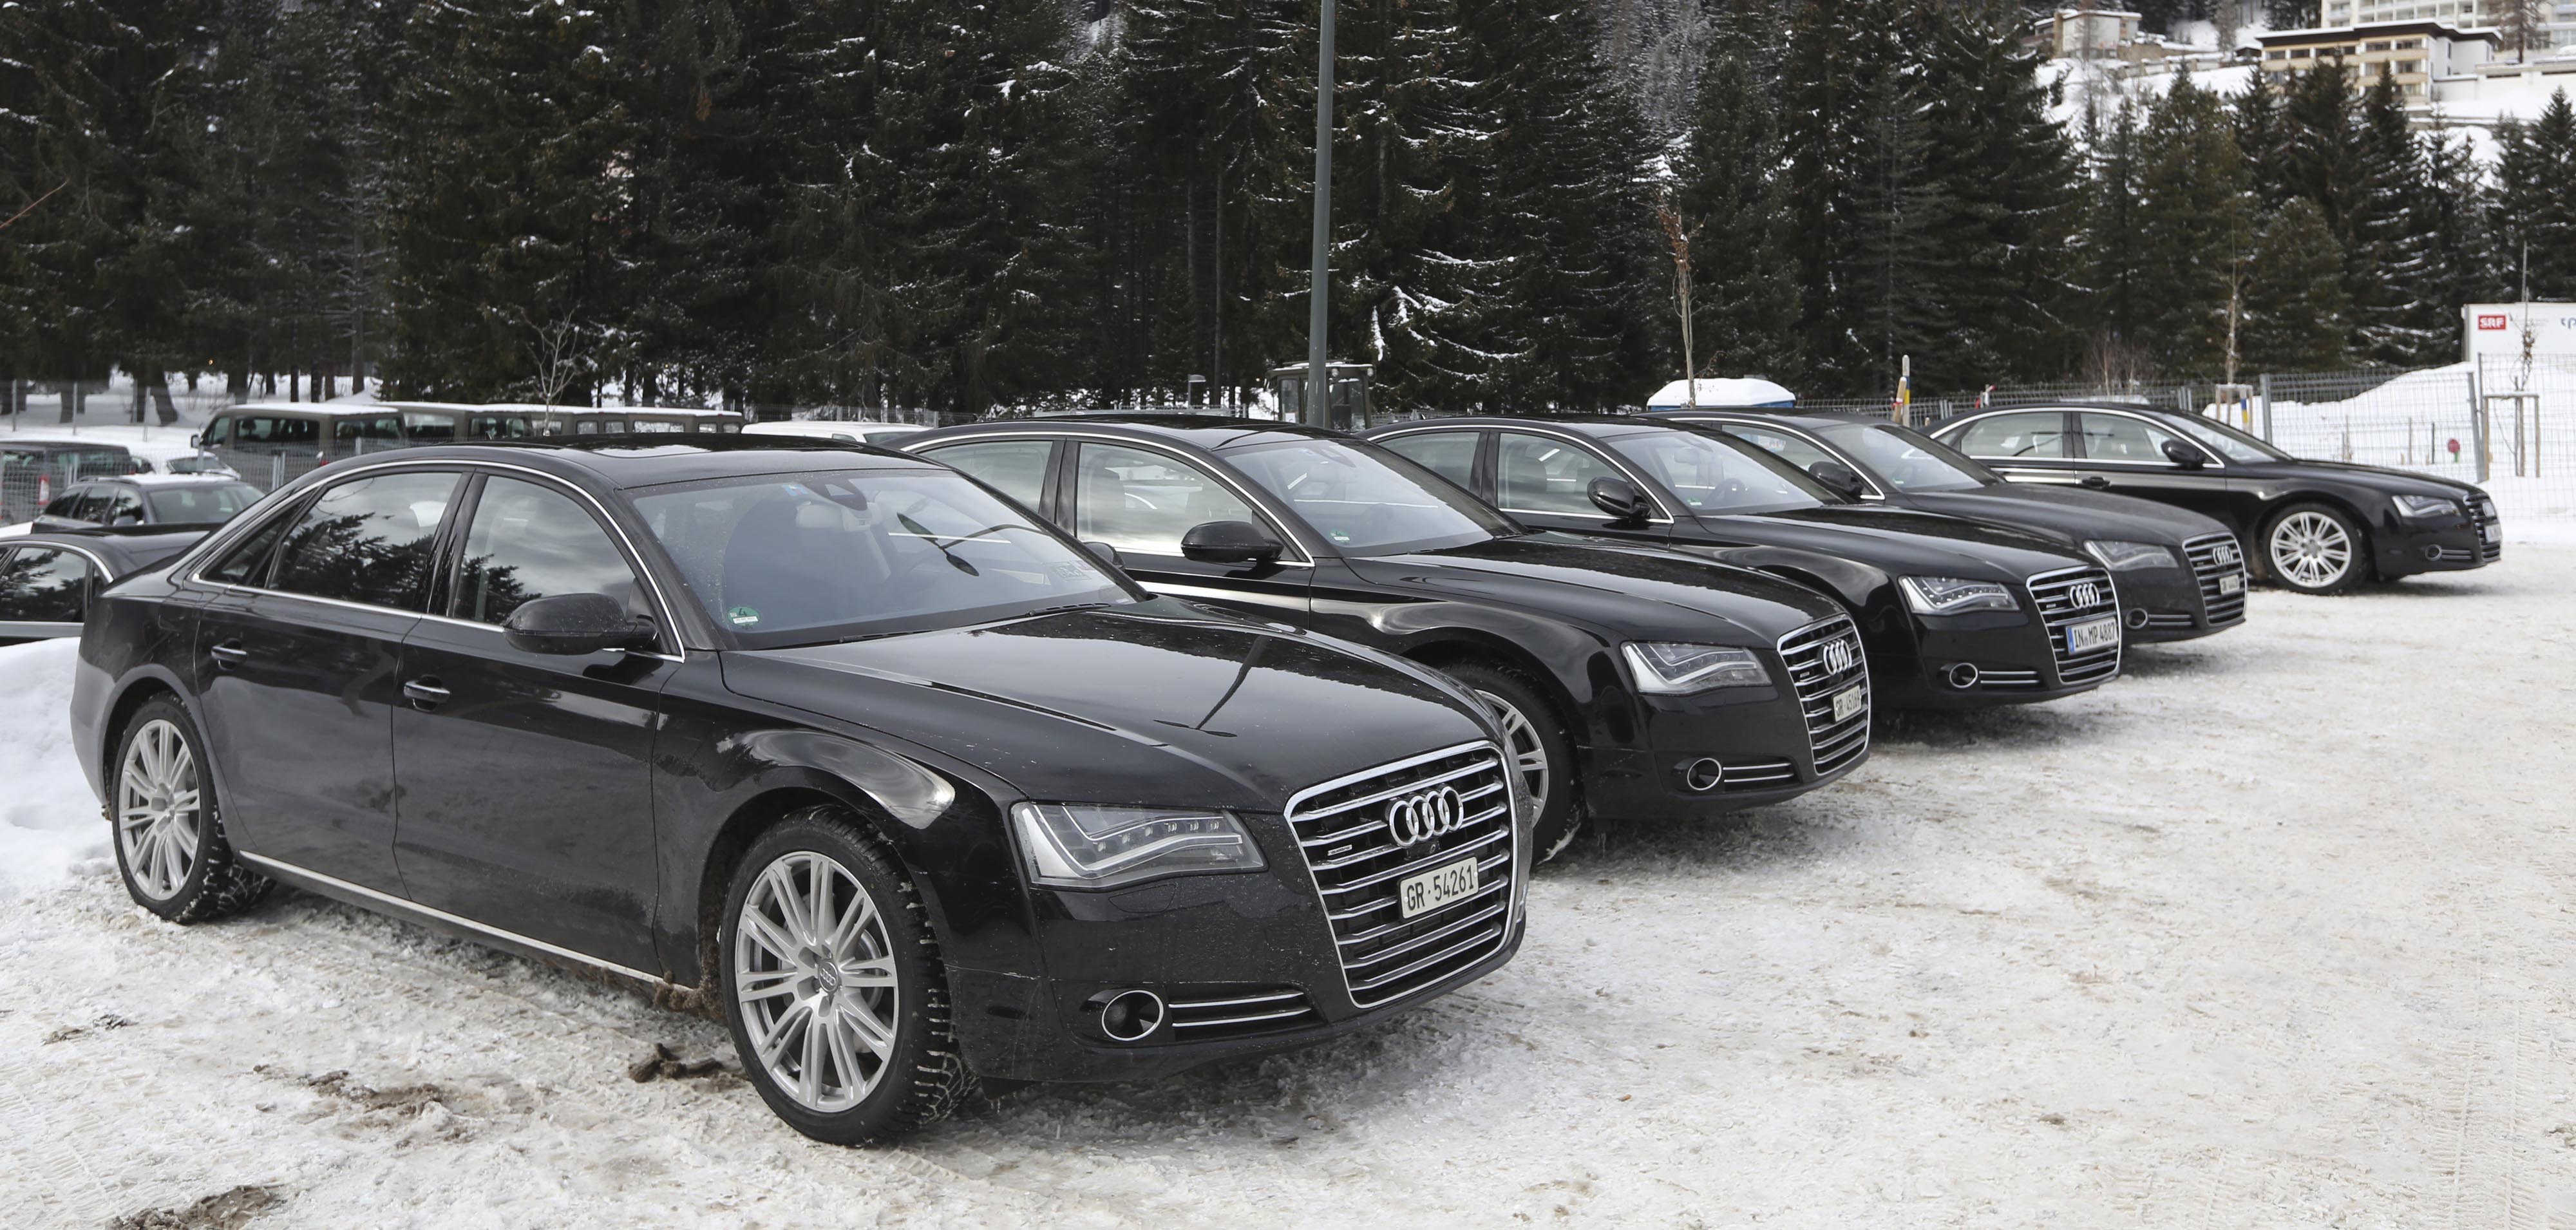 A fleet of Audi A8 Quattro automobiles,&nbsp;used as VIP transport during the World Economic Forum, are seen in Davos.